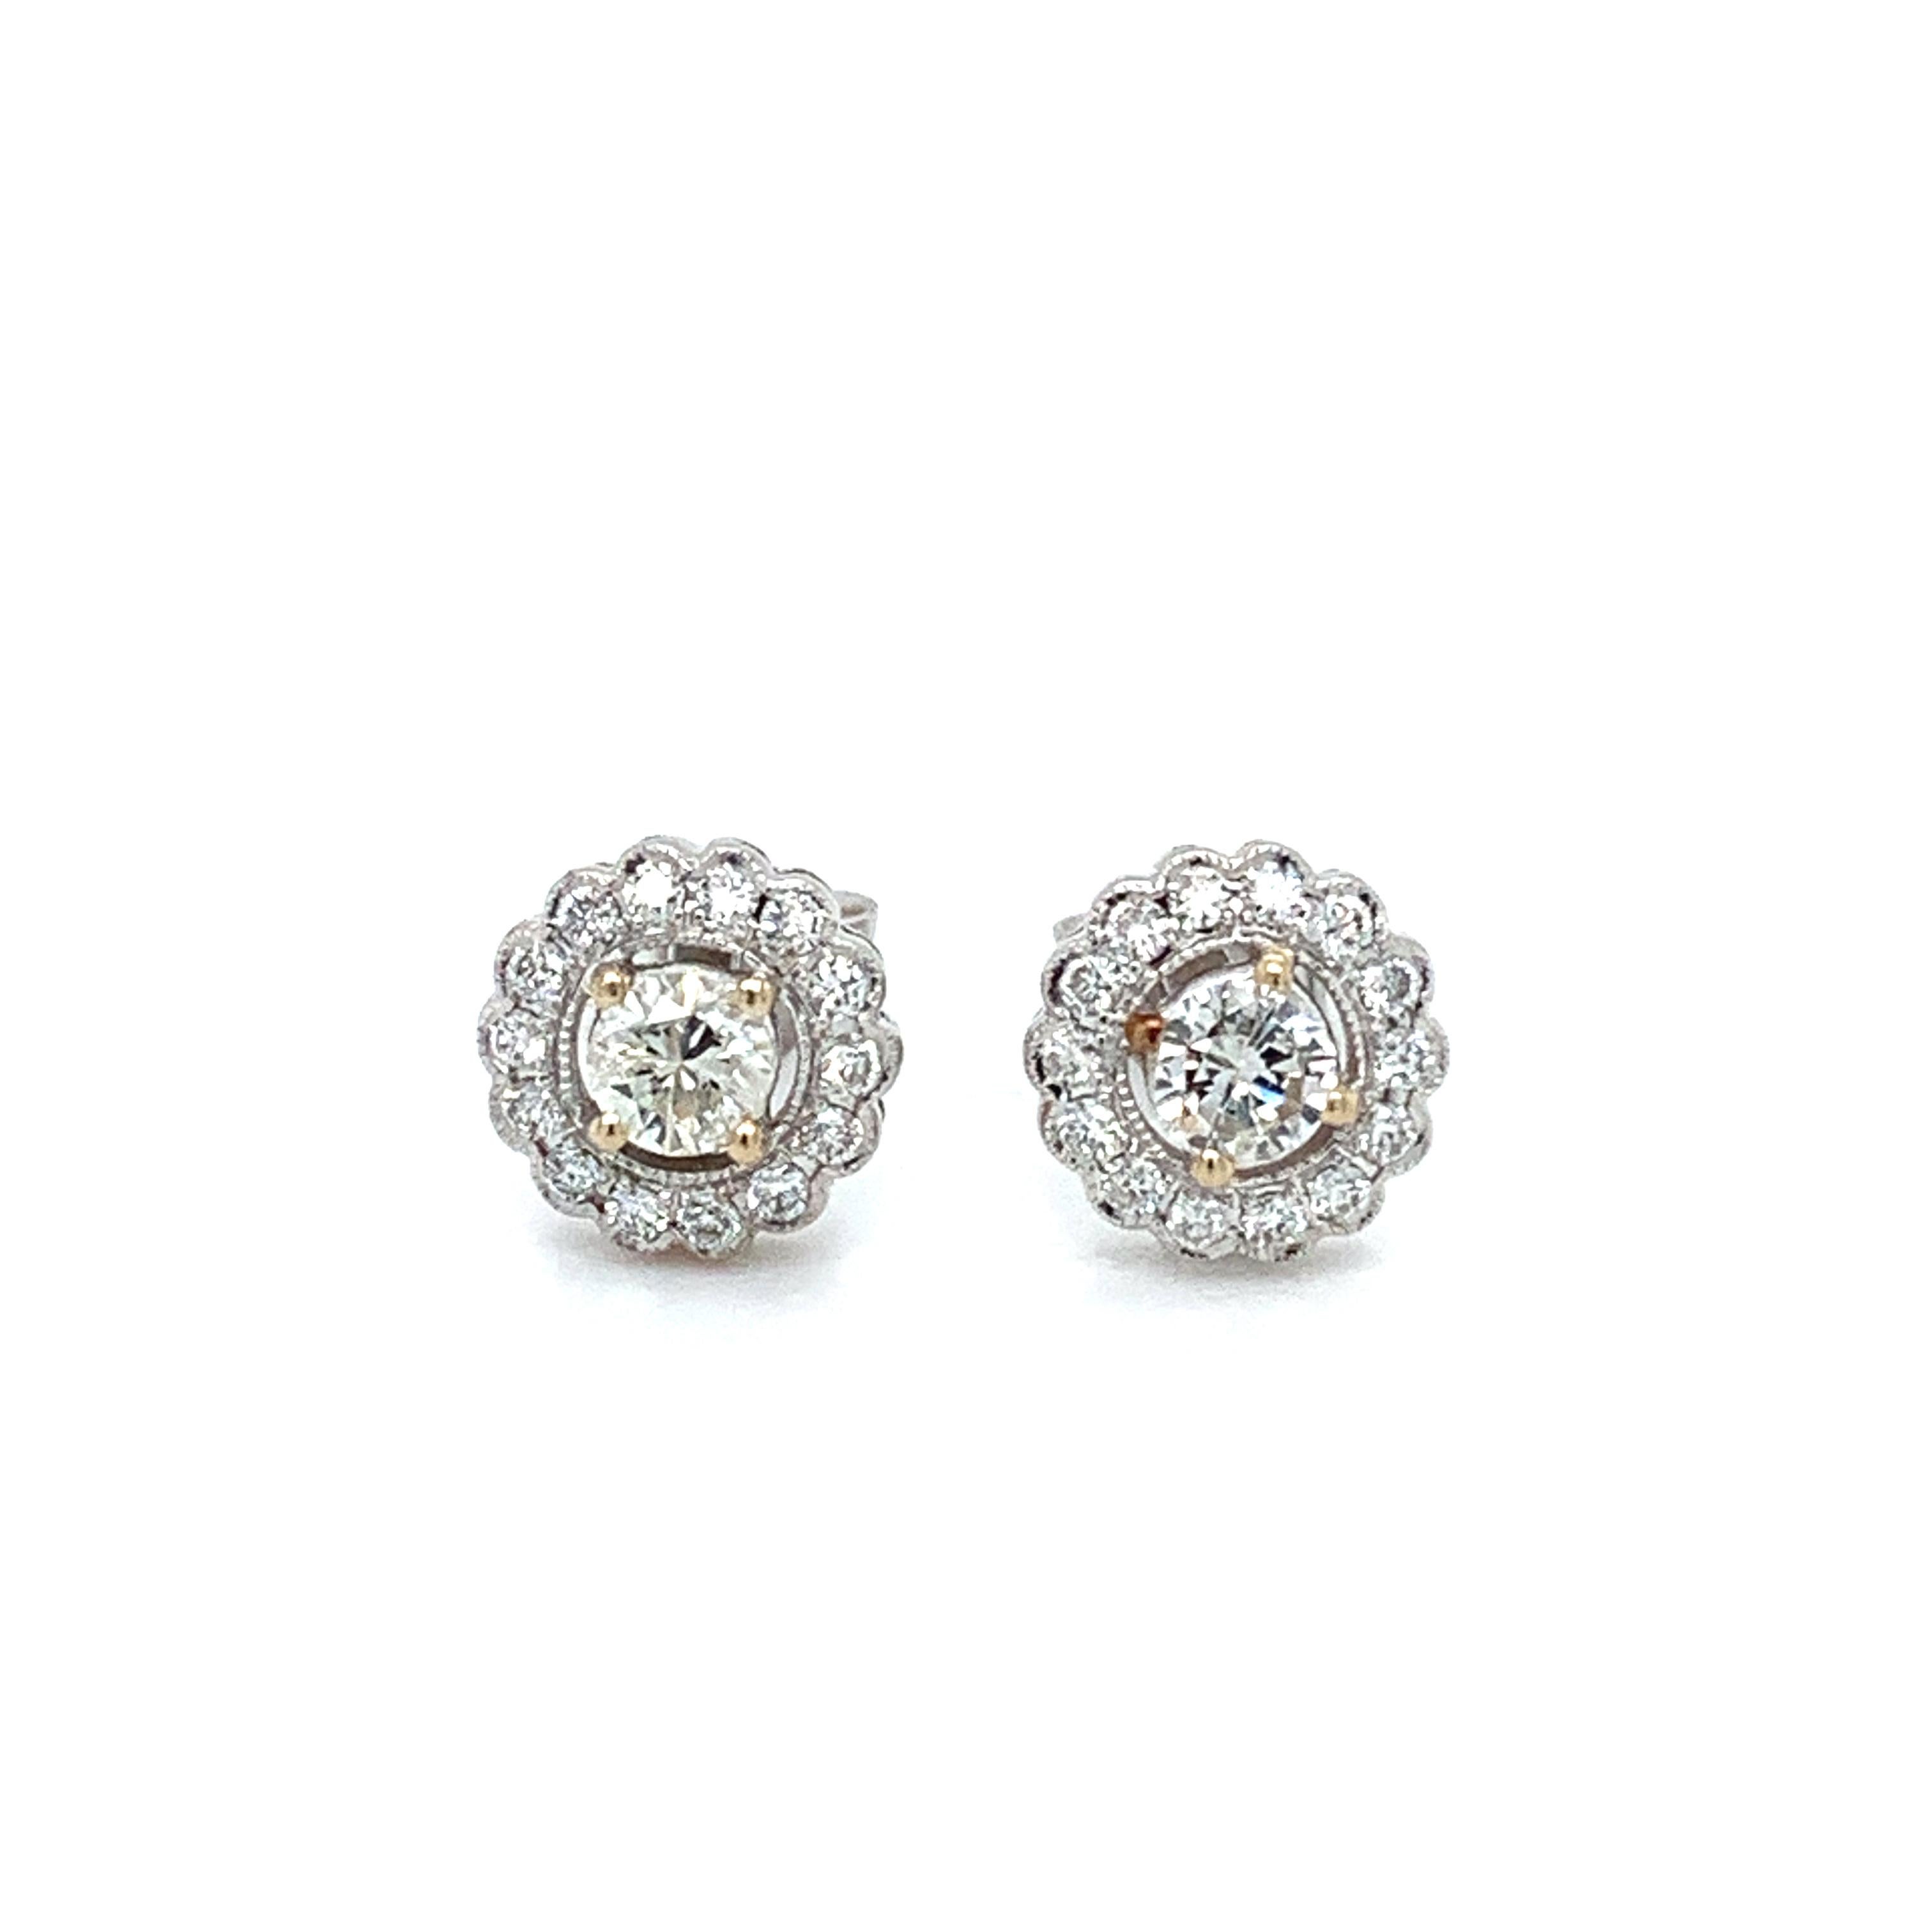 Round Cut Diamond halo stud earrings 18k white gold For Sale